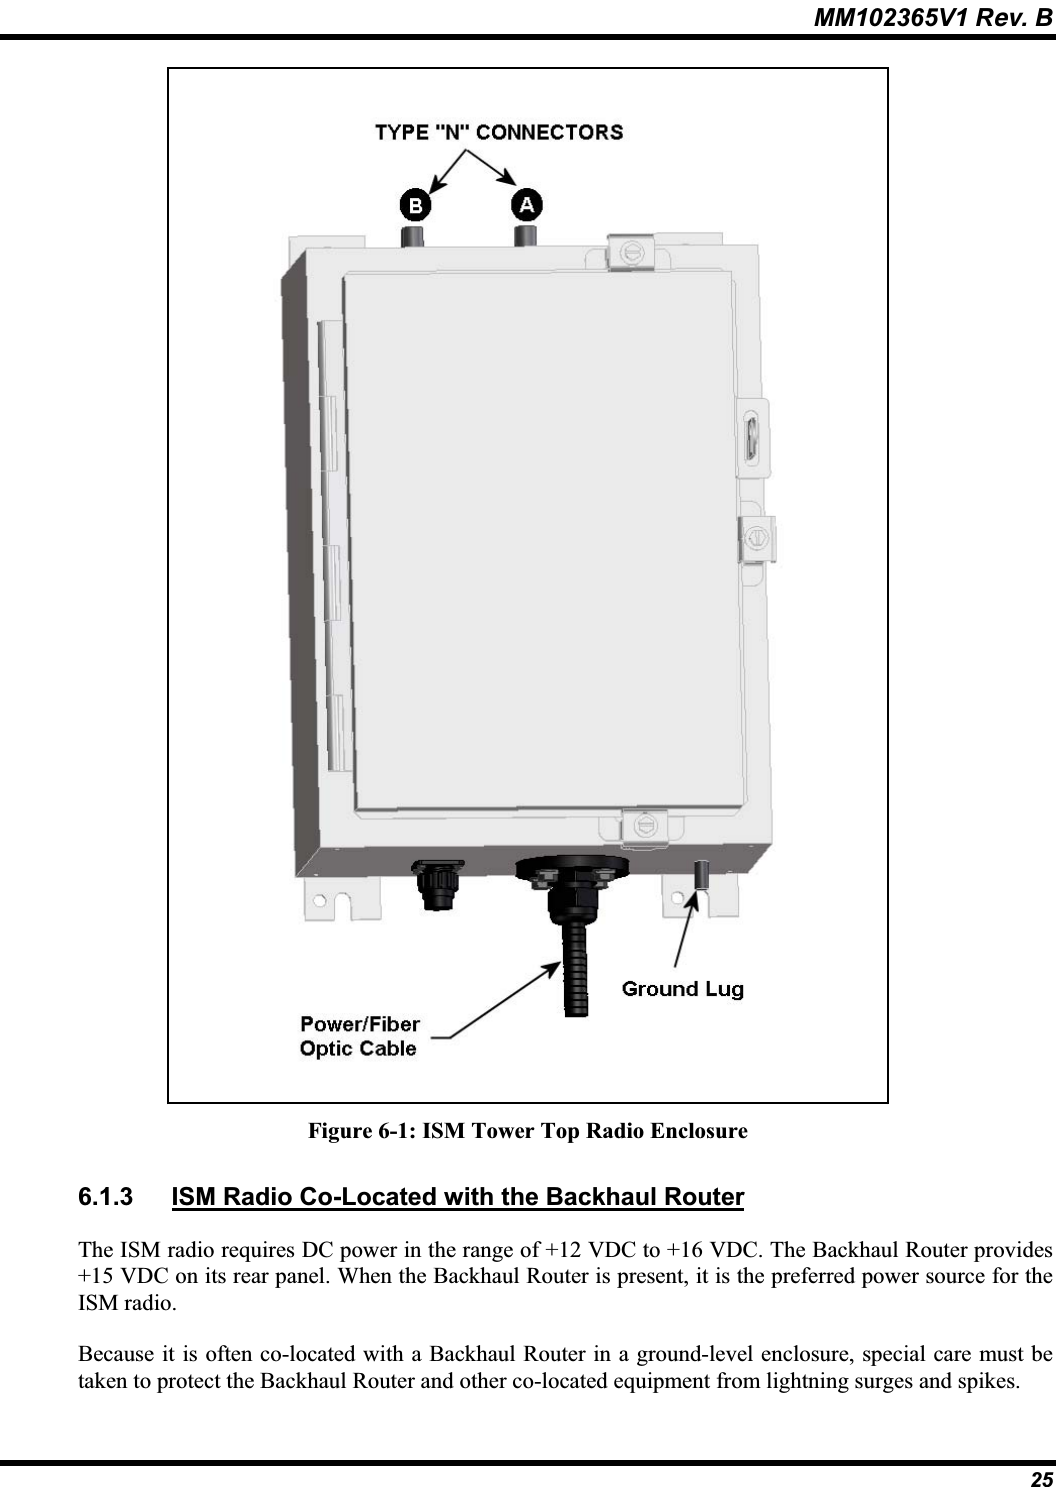 MM102365V1 Rev. B Figure 6-1: ISM Tower Top Radio Enclosure 6.1.3 ISM Radio Co-Located with the Backhaul RouterThe ISM radio requires DC power in the range of +12 VDC to +16 VDC. The Backhaul Router provides +15 VDC on its rear panel. When the Backhaul Router is present, it is the preferred power source for the ISM radio. Because it is often co-located with a Backhaul Router in a ground-level enclosure, special care must be taken to protect the Backhaul Router and other co-located equipment from lightning surges and spikes. 25